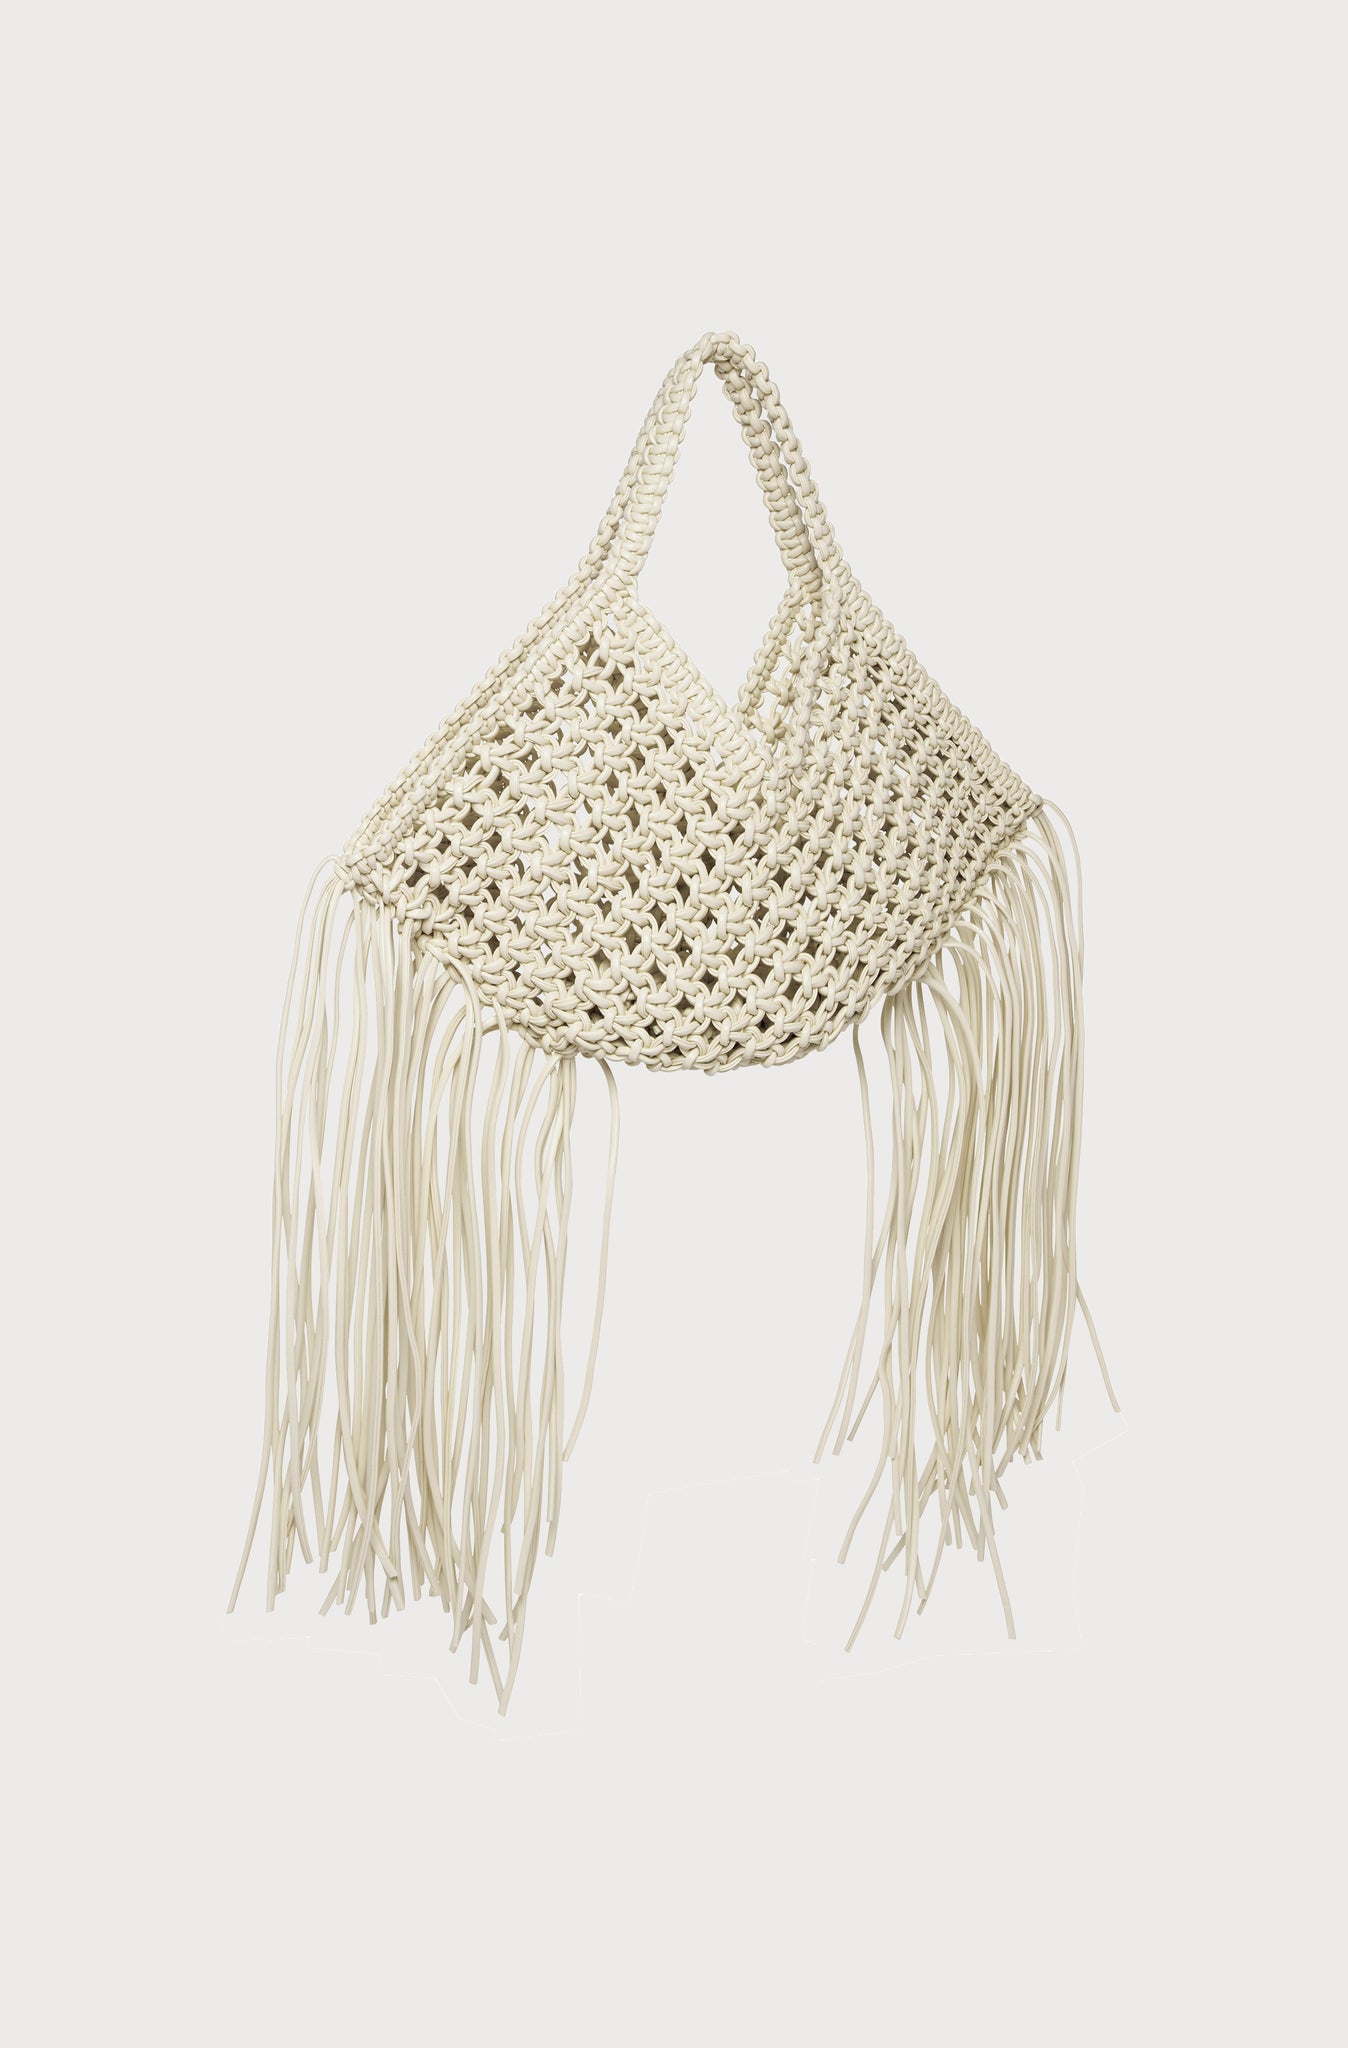 SMALL WOVEN BASKET - OFF WHITE